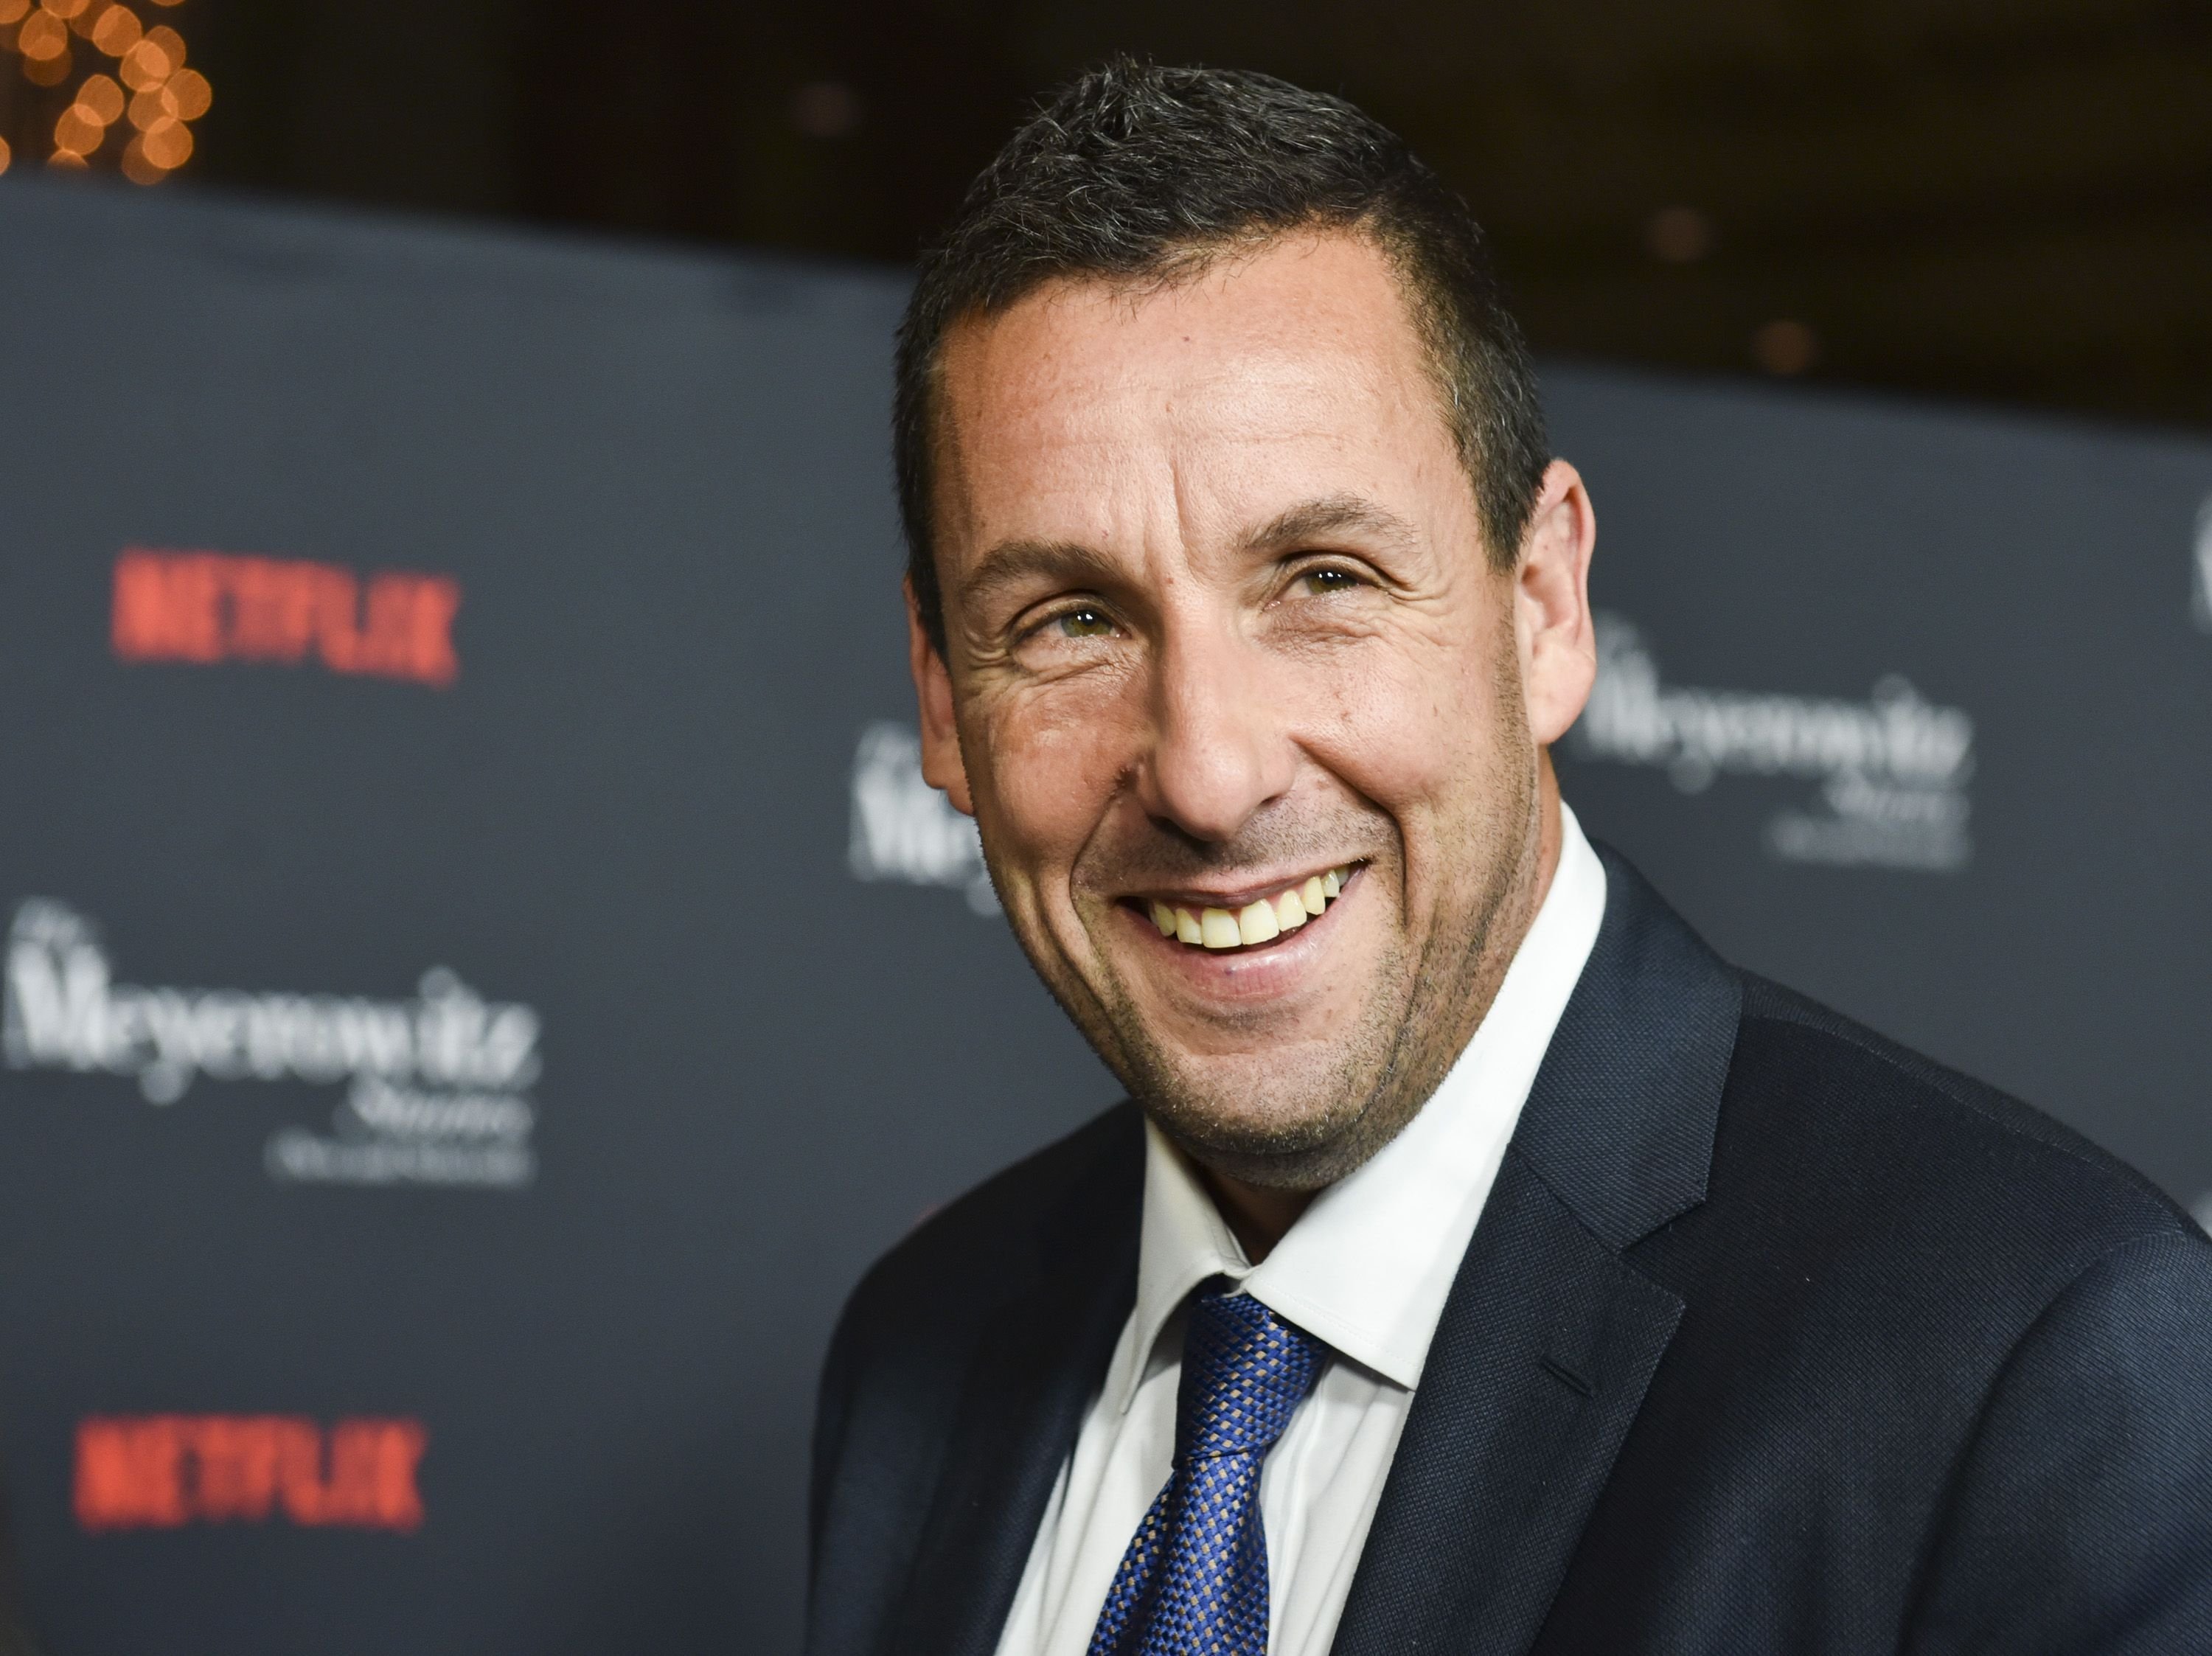 Adam Sandler attends a screening of Netflix's "The Meyerowitz Stories (New and Selected)" at Directors Guild Of America. | Source: Getty Images